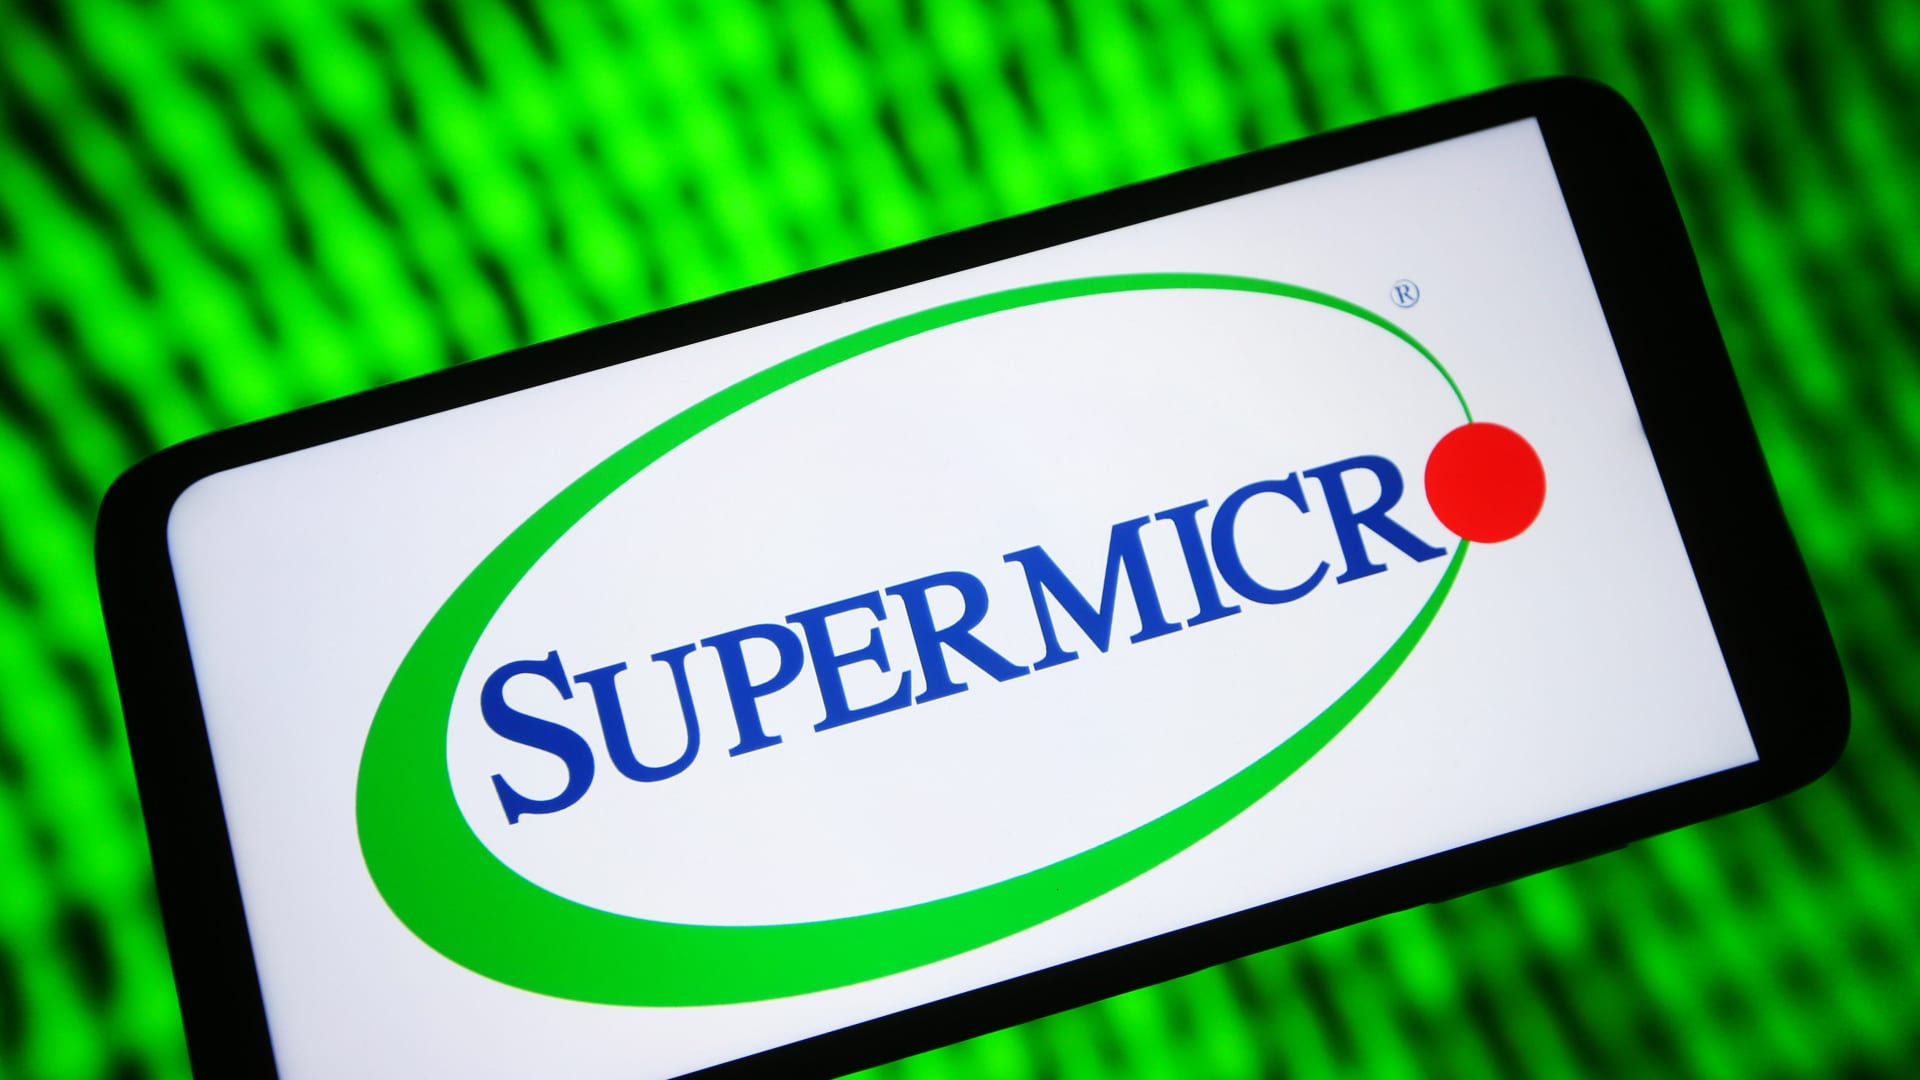 AI play Super Micro is getting crushed, but most analysts stay bullish [Video]